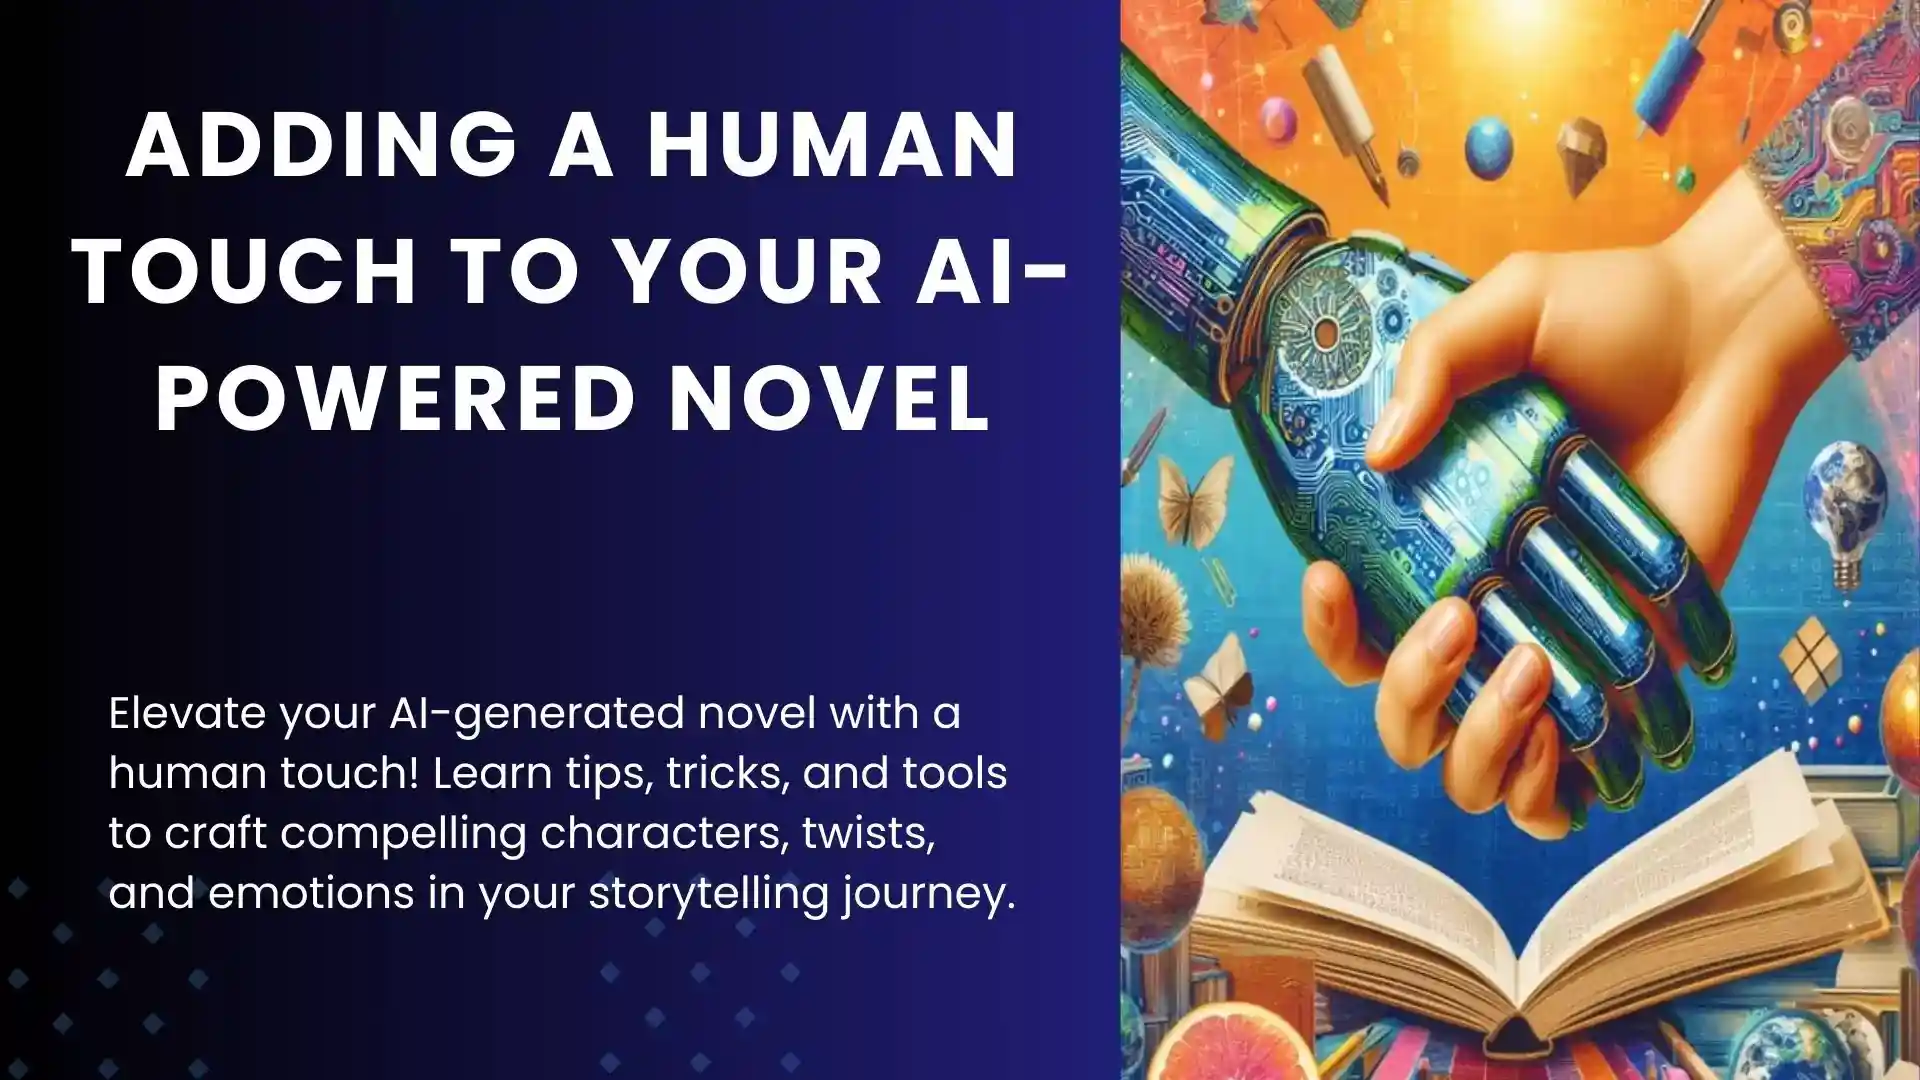 Human and AI hands clasp amidst a storytelling collage, symbolizing collaboration to add a human touch to your AI novel.